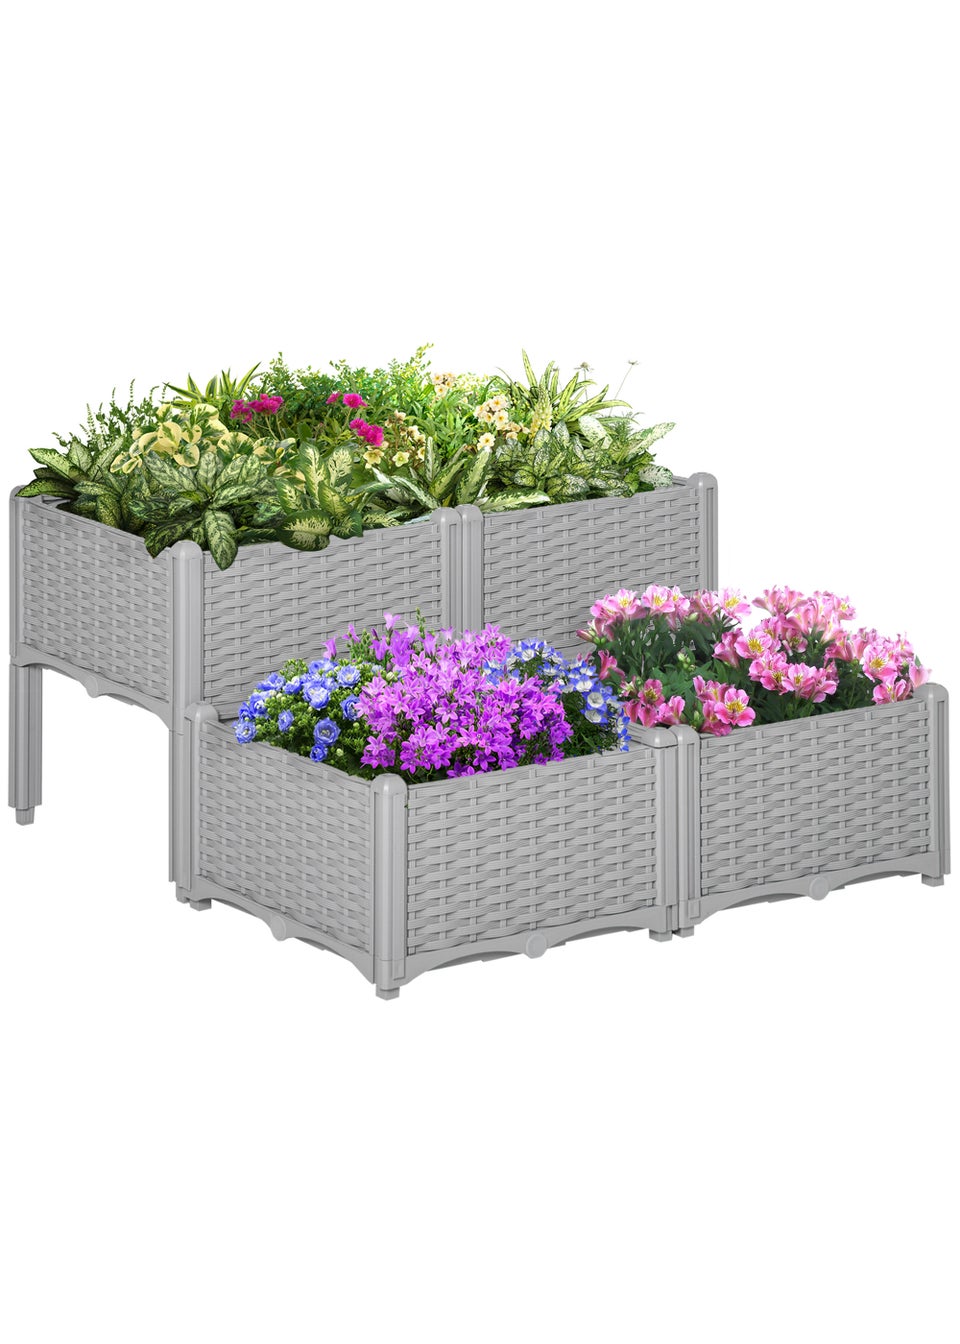 Outsunny Set of 4 26L Garden Raised Bed Elevated Patio Flower Plant Planter Box PP Vegetables Planting Container